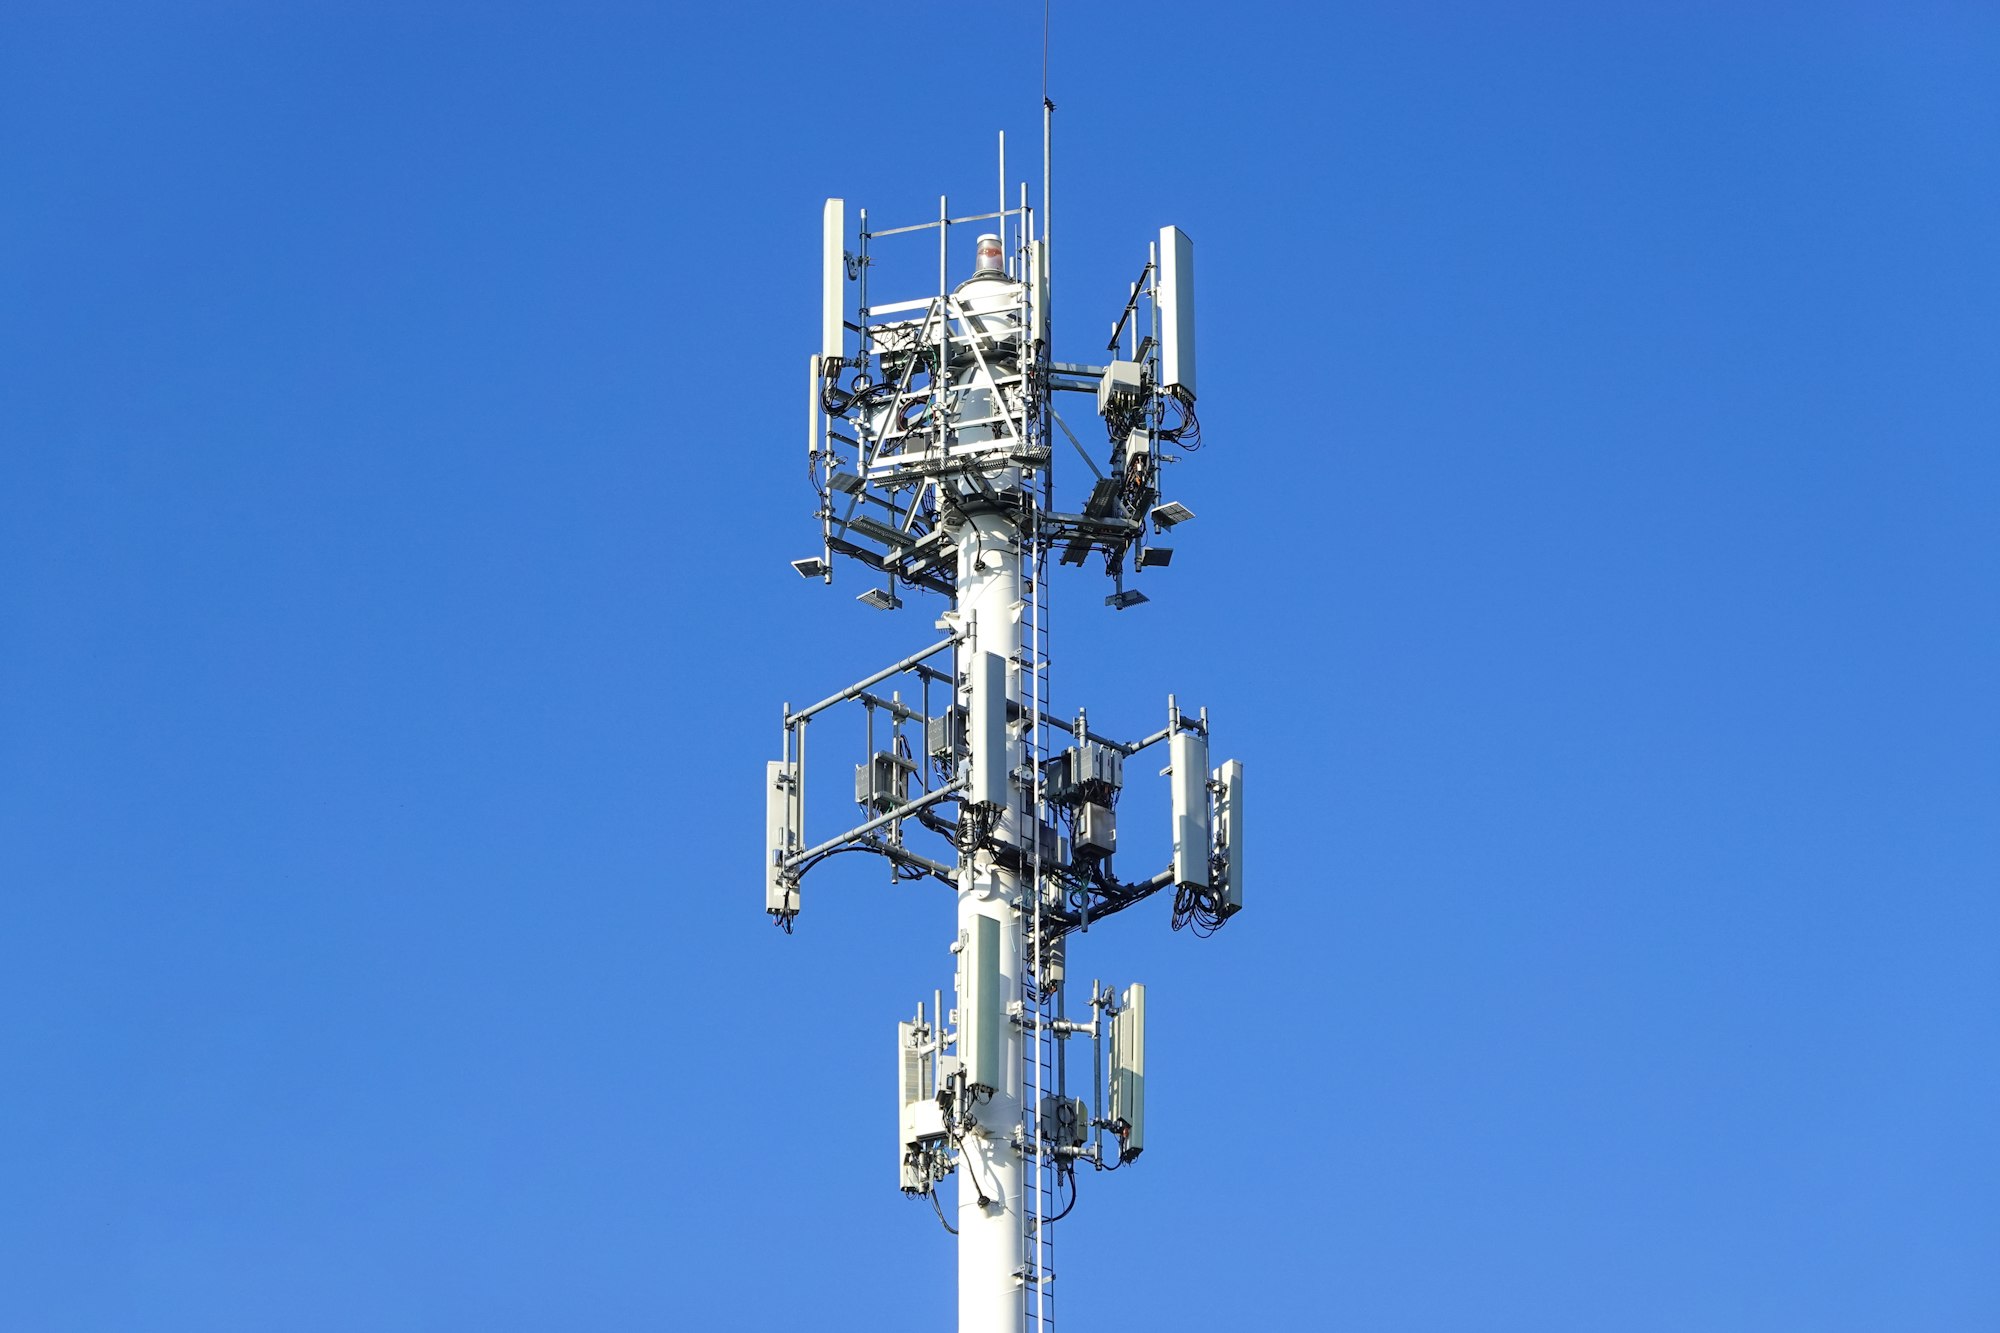 Lawmakers Ask How to Pave the Way for Next-Generation Wireless Technologies